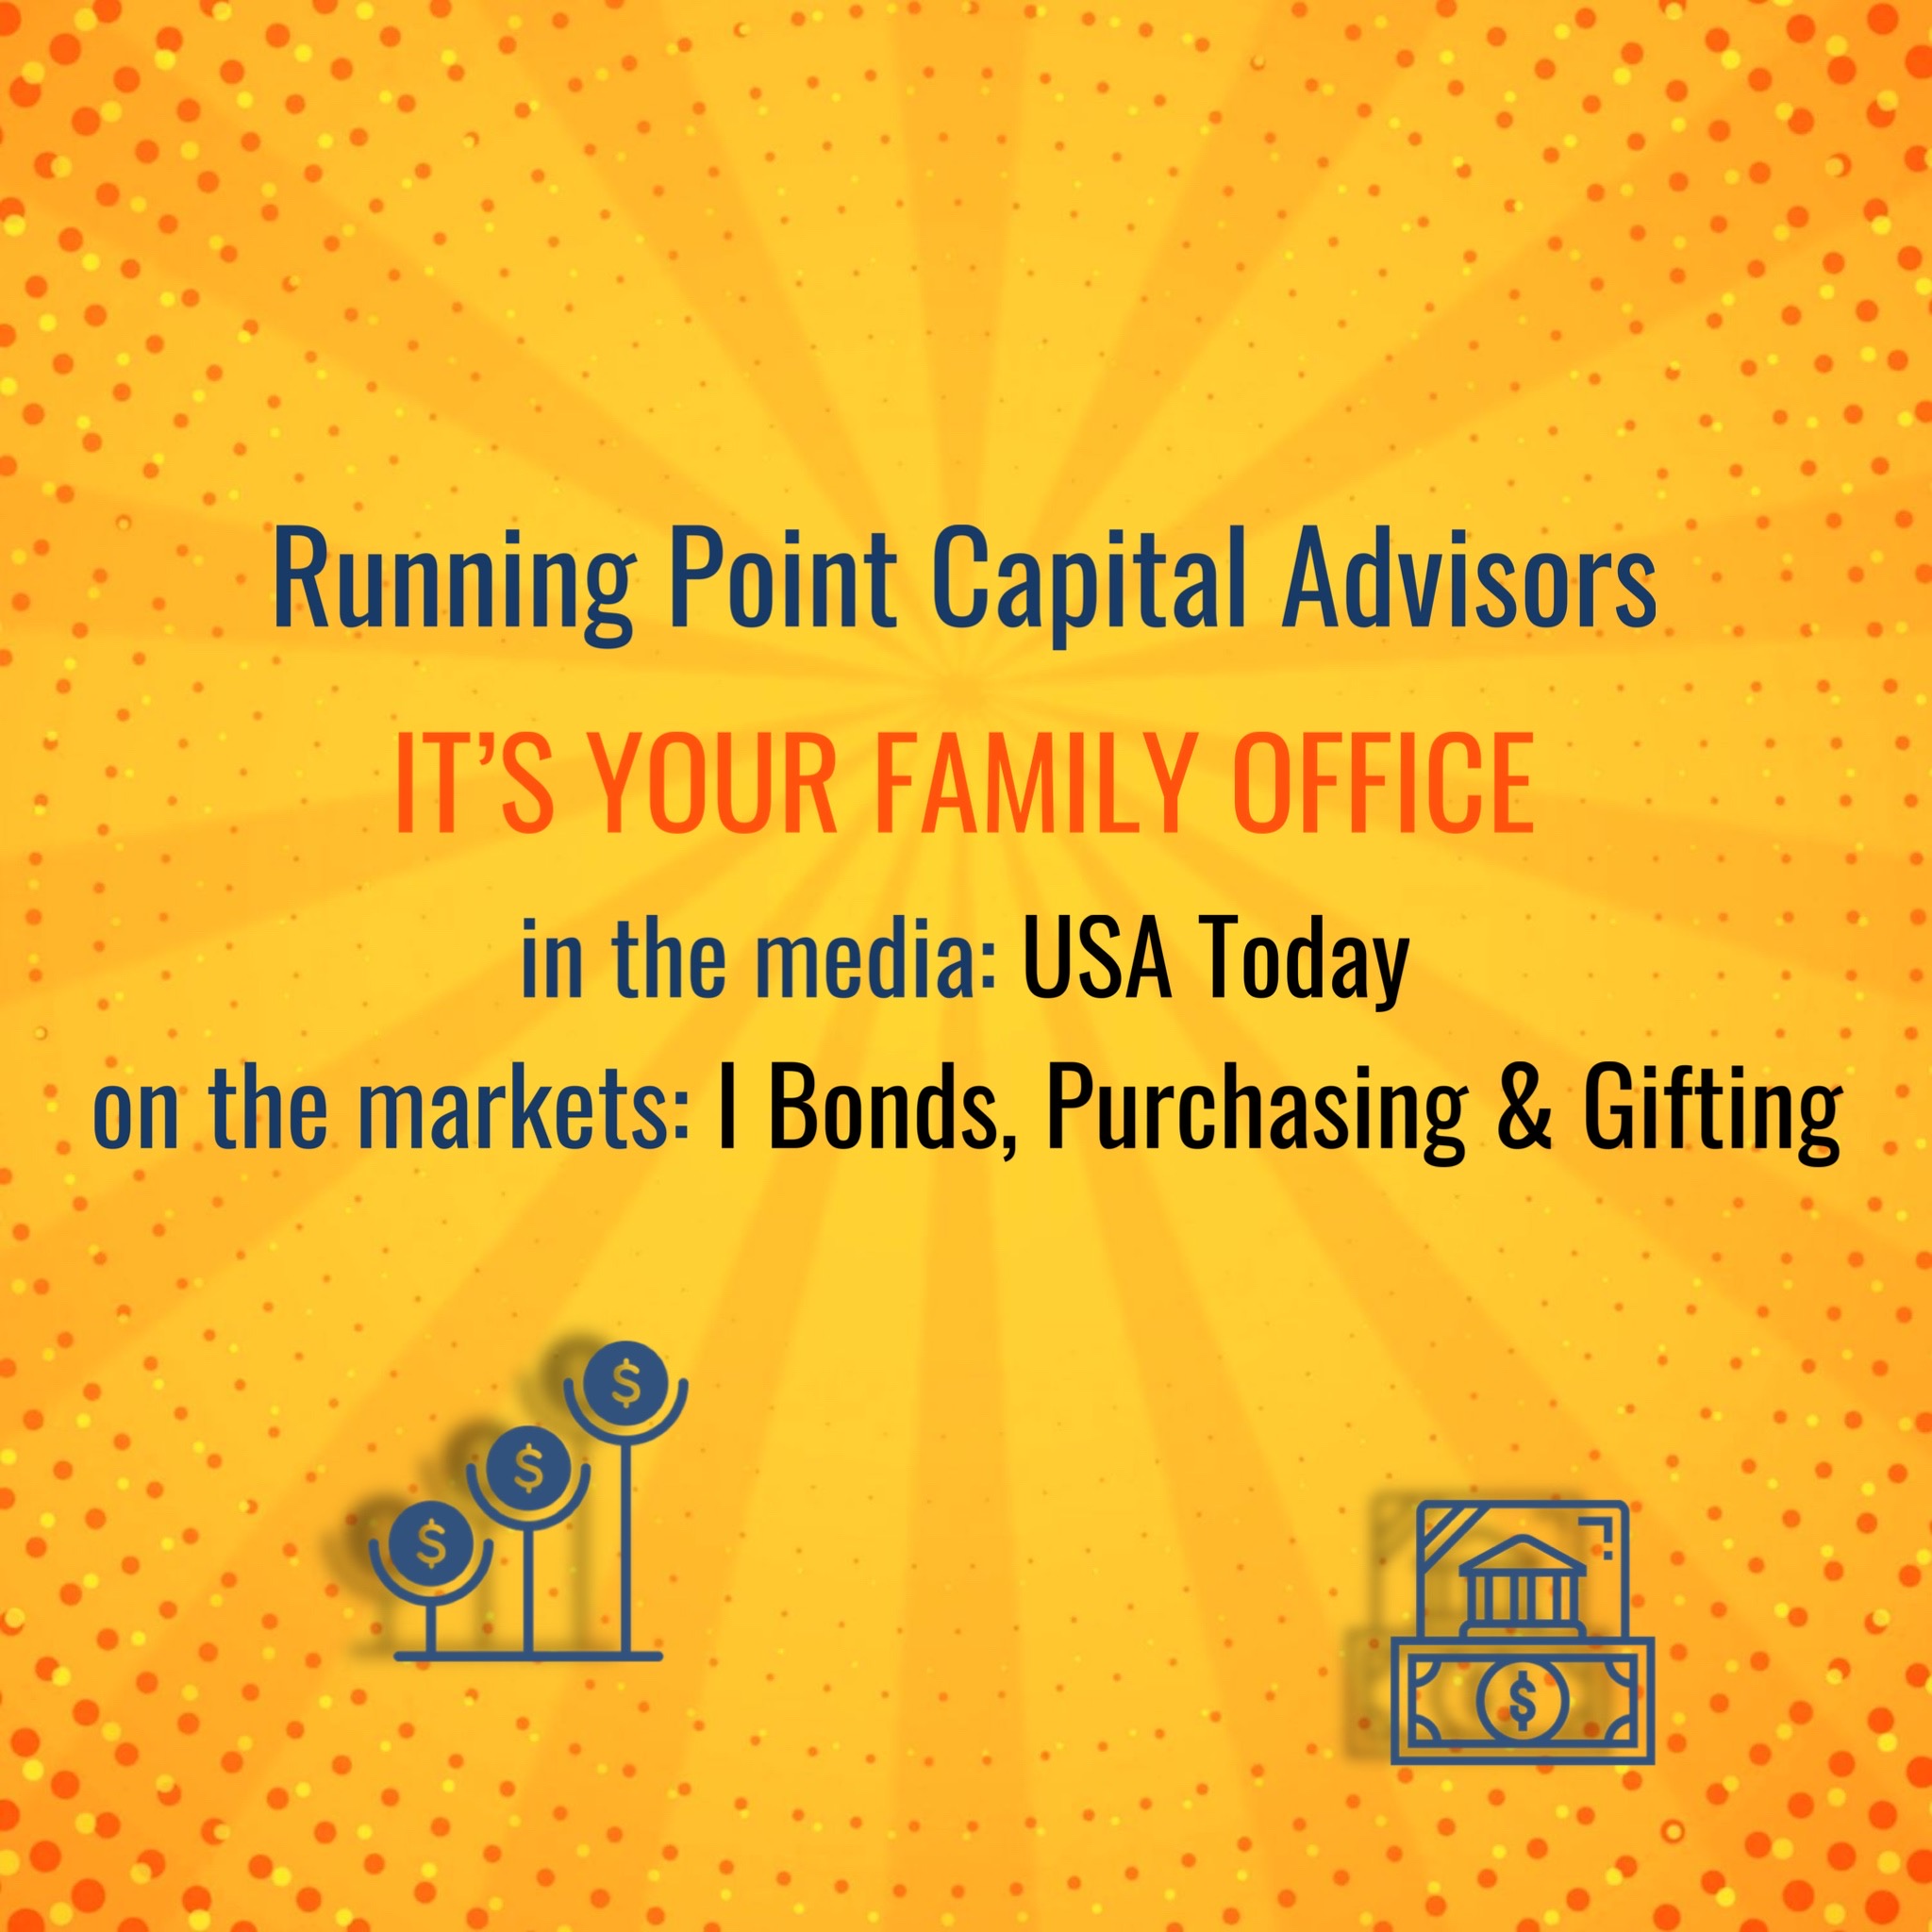 USA Today: I Bond Purchases and Gifts